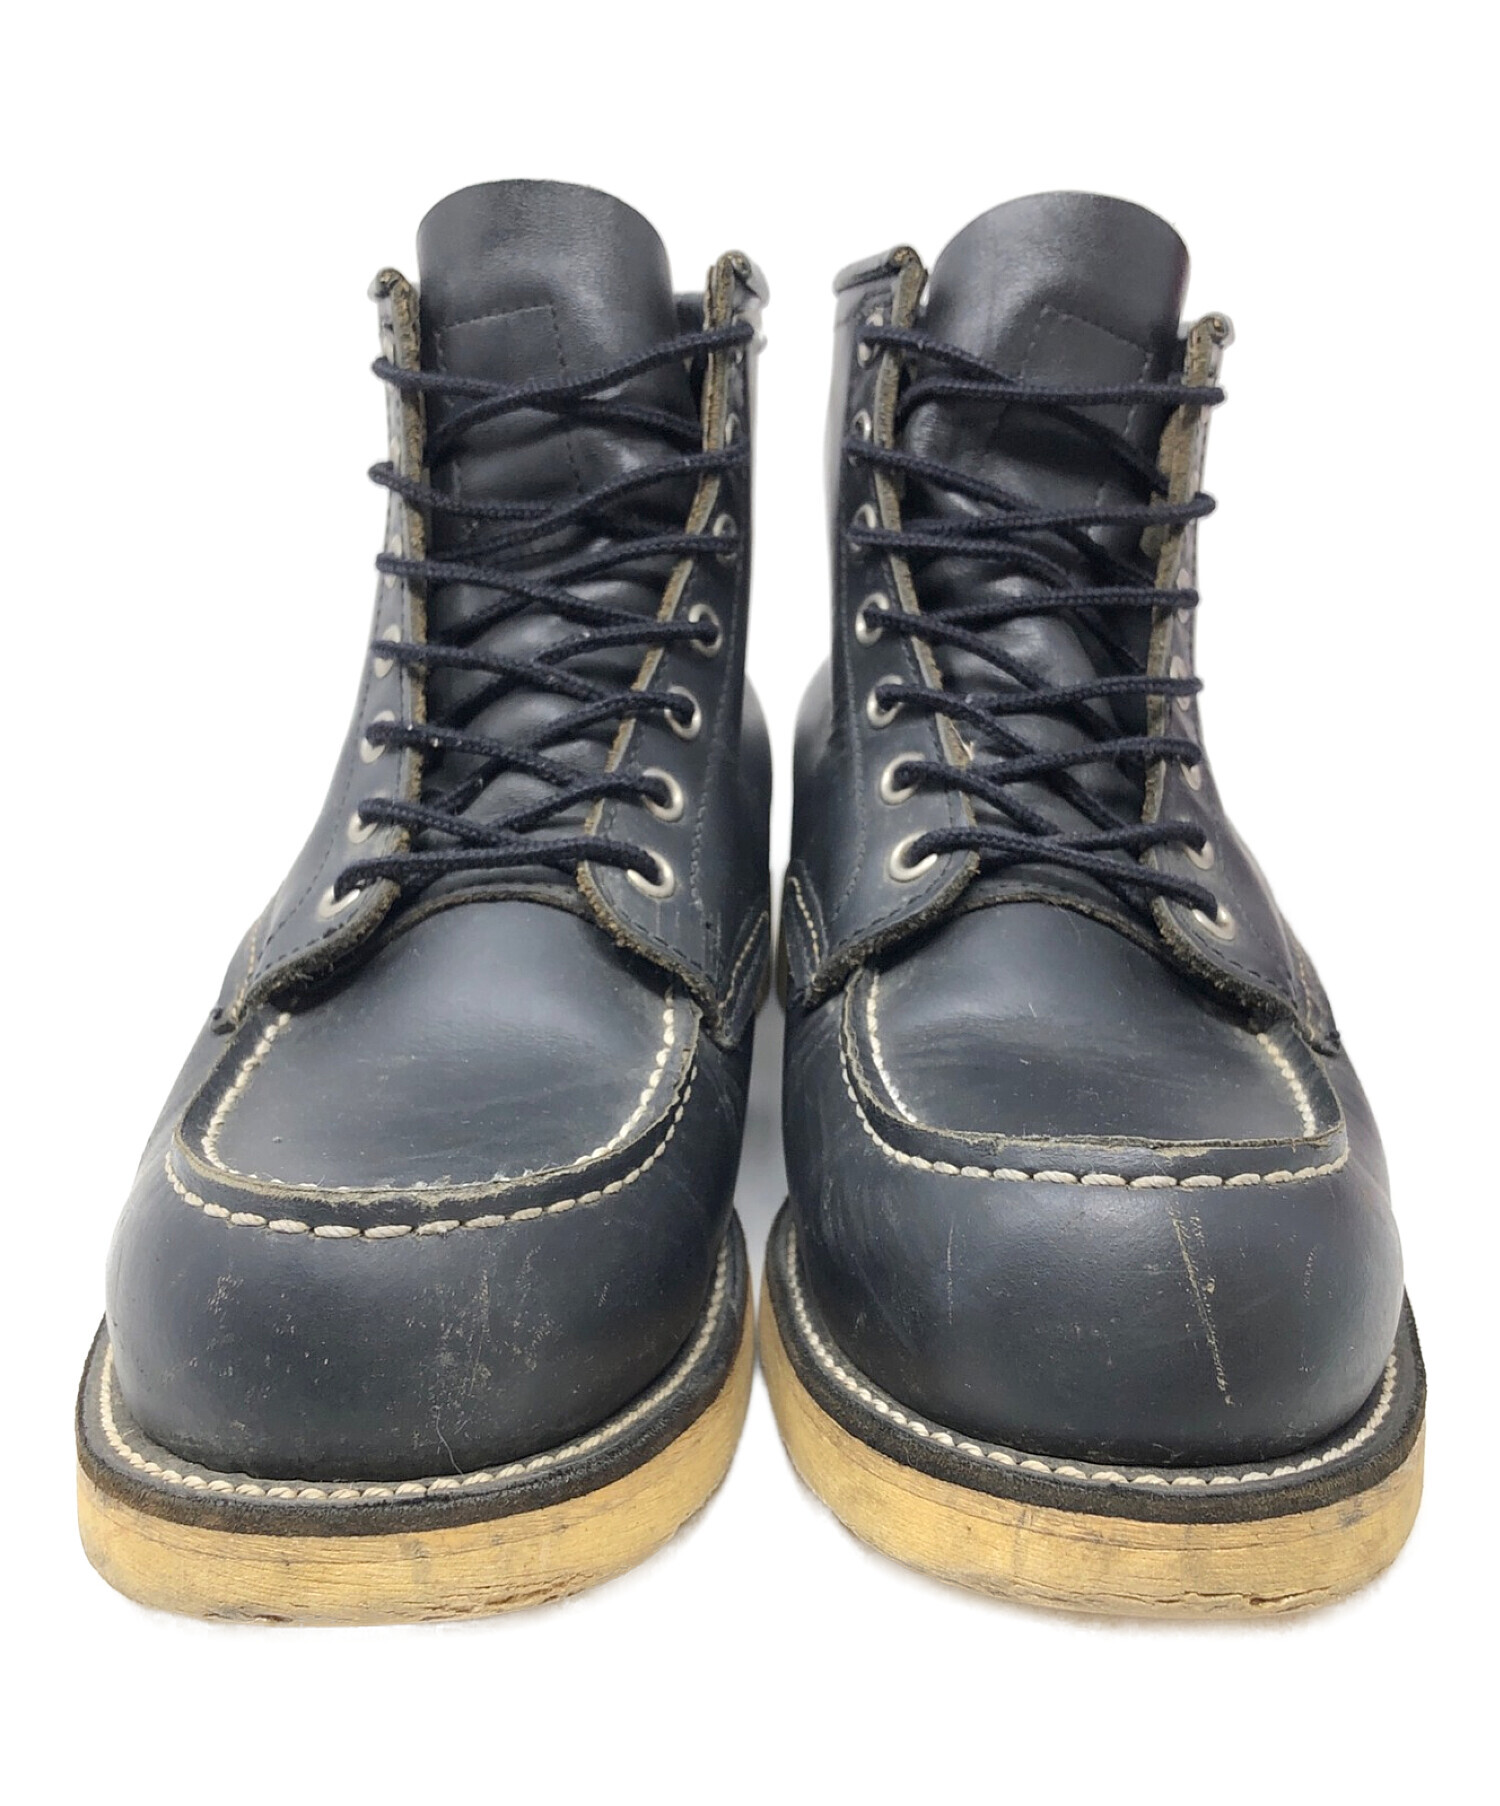 RED WING レッドウィング 9075 新品未使用品ずっとクローゼット保管でした